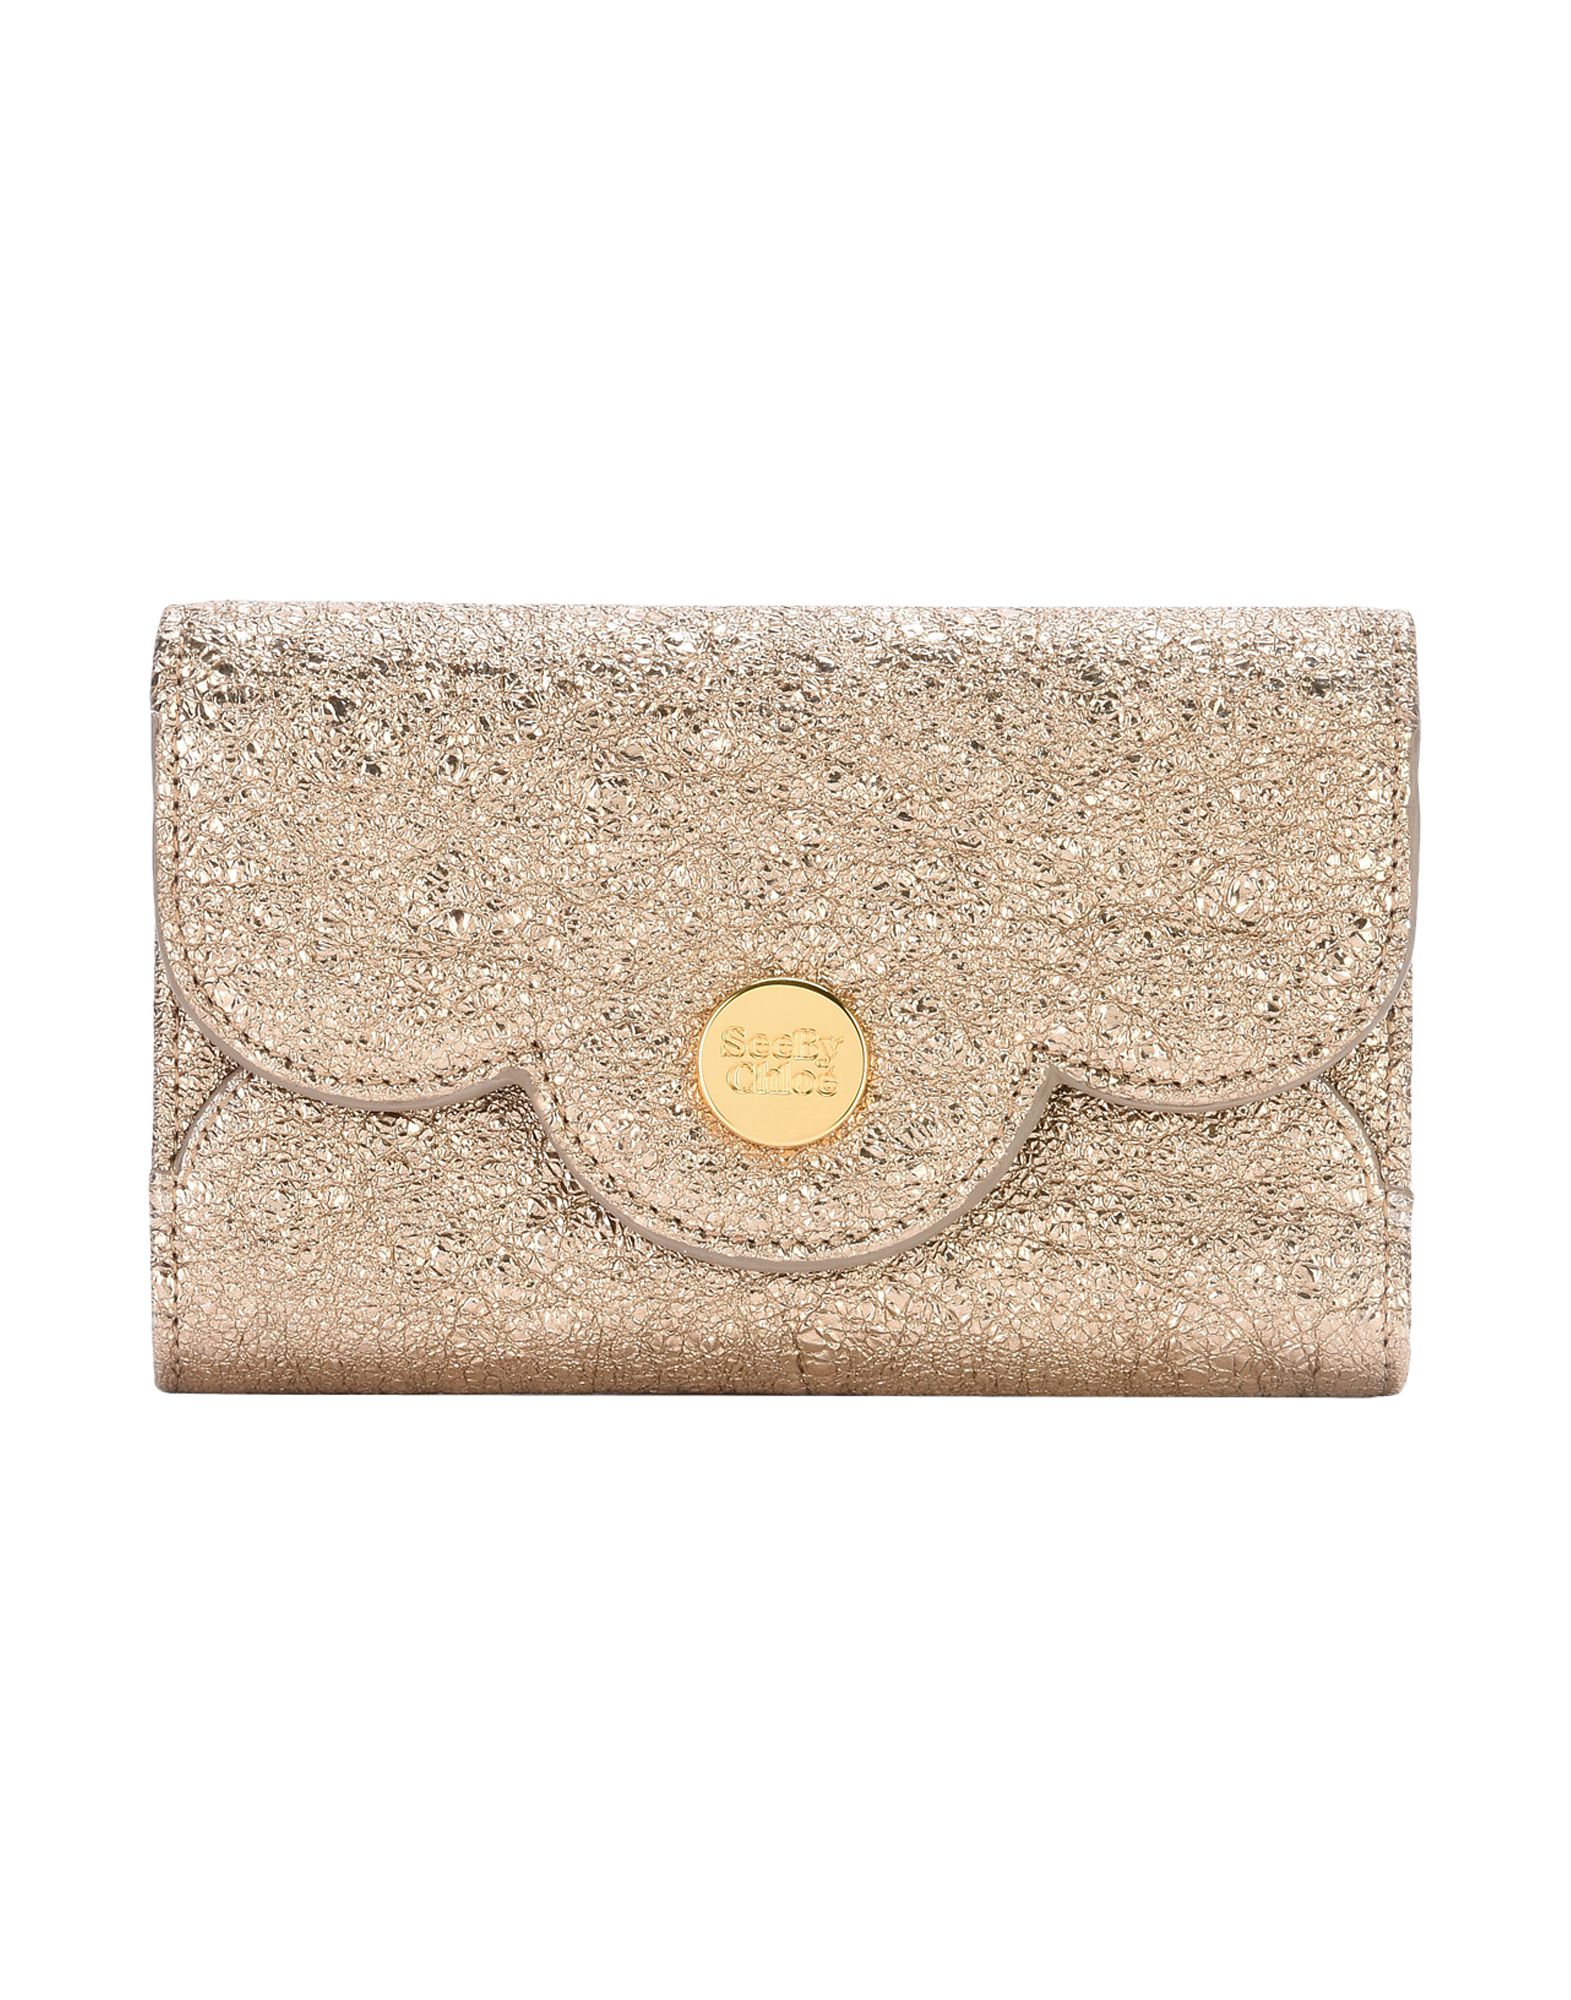 SEE BY CHLOÉ WALLETS,46587965II 1